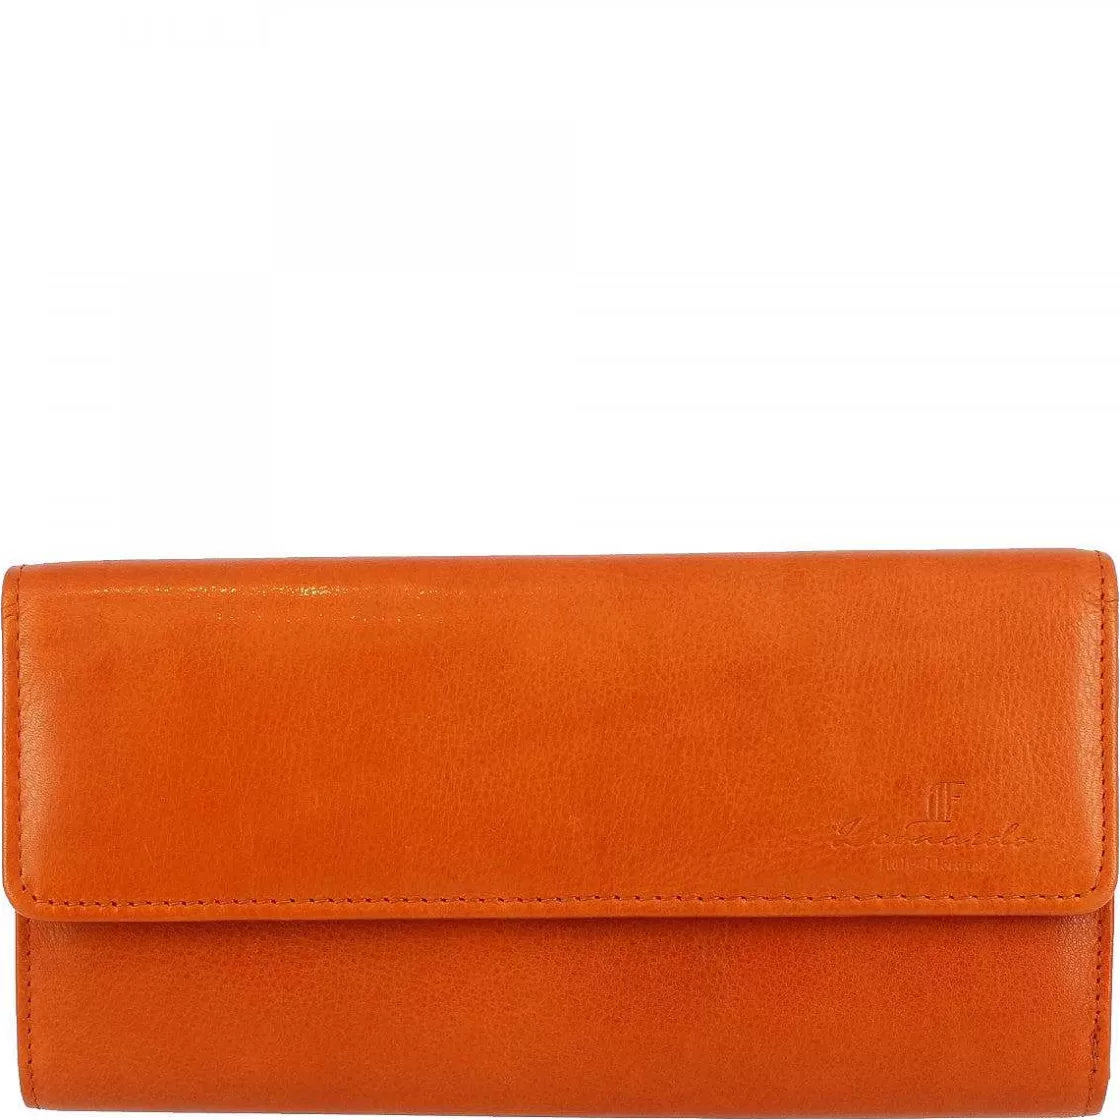 Leonardo Nappa Leather Wallet With Compartments For Credit Cards, Coins And Banknotes Available In Various Colours Store